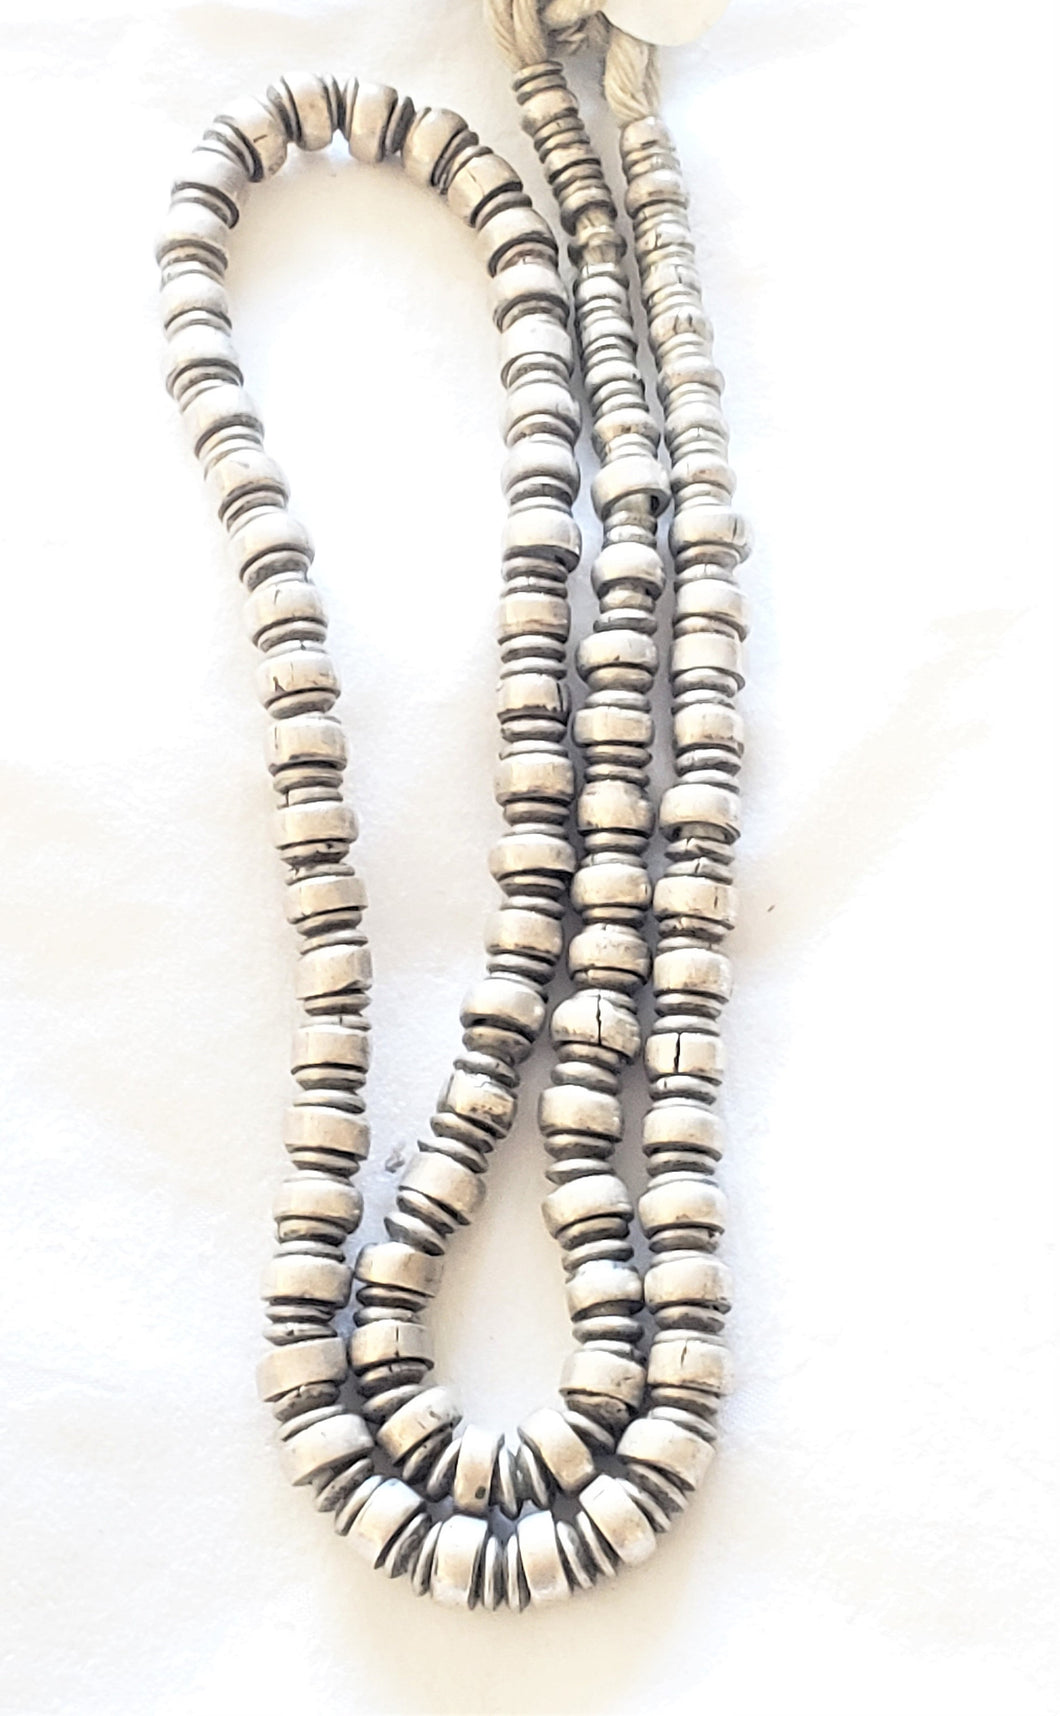 Antique Ethiopian silver Heishi Beads necklace,Hand Crafted Silver,Ethnic Jewelry,Tribal Jewelry,